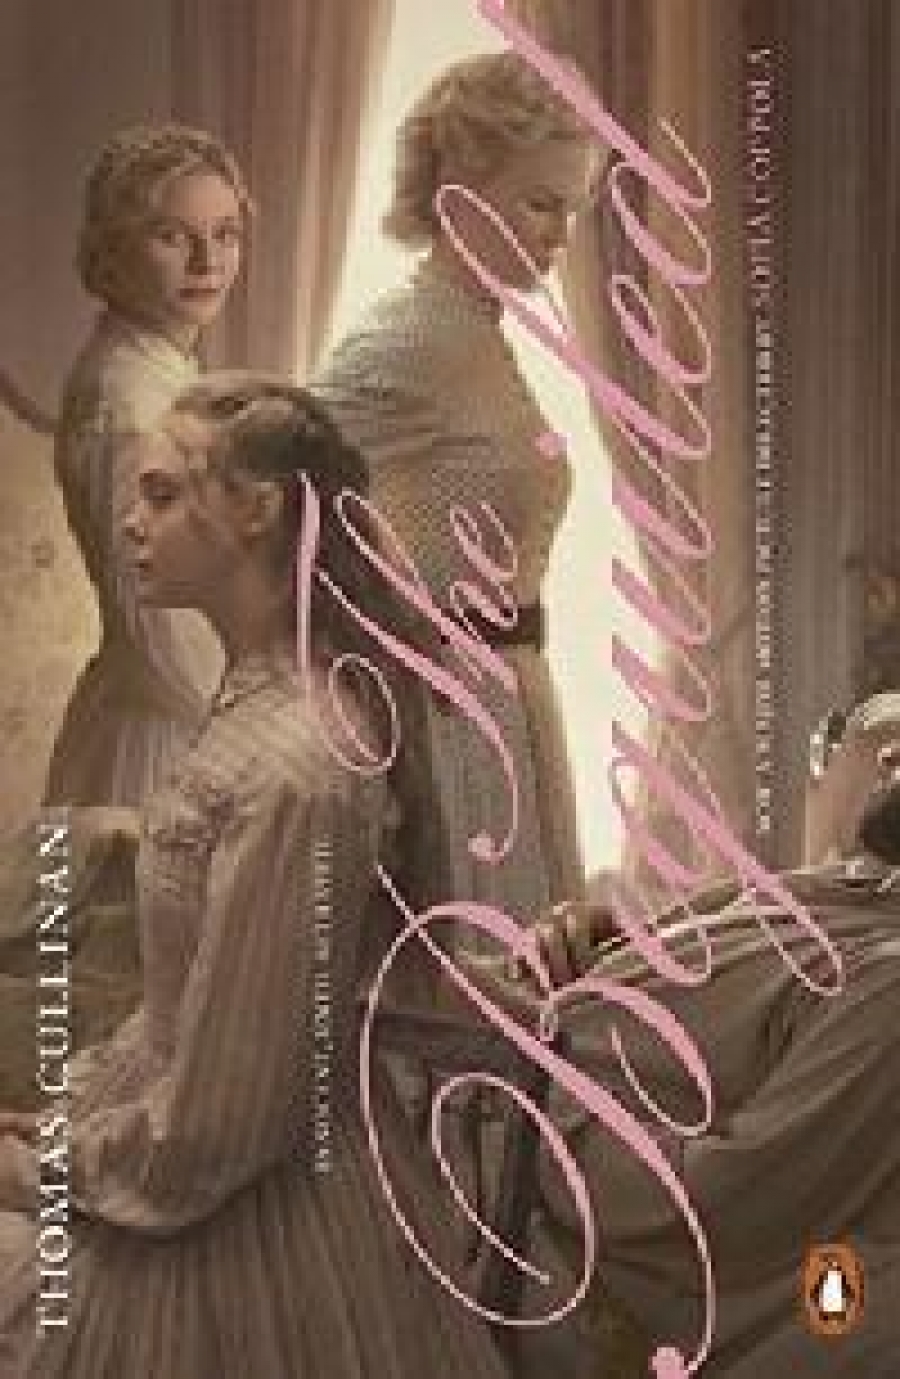 Thomas, Cullinan The Beguiled: film tie in 